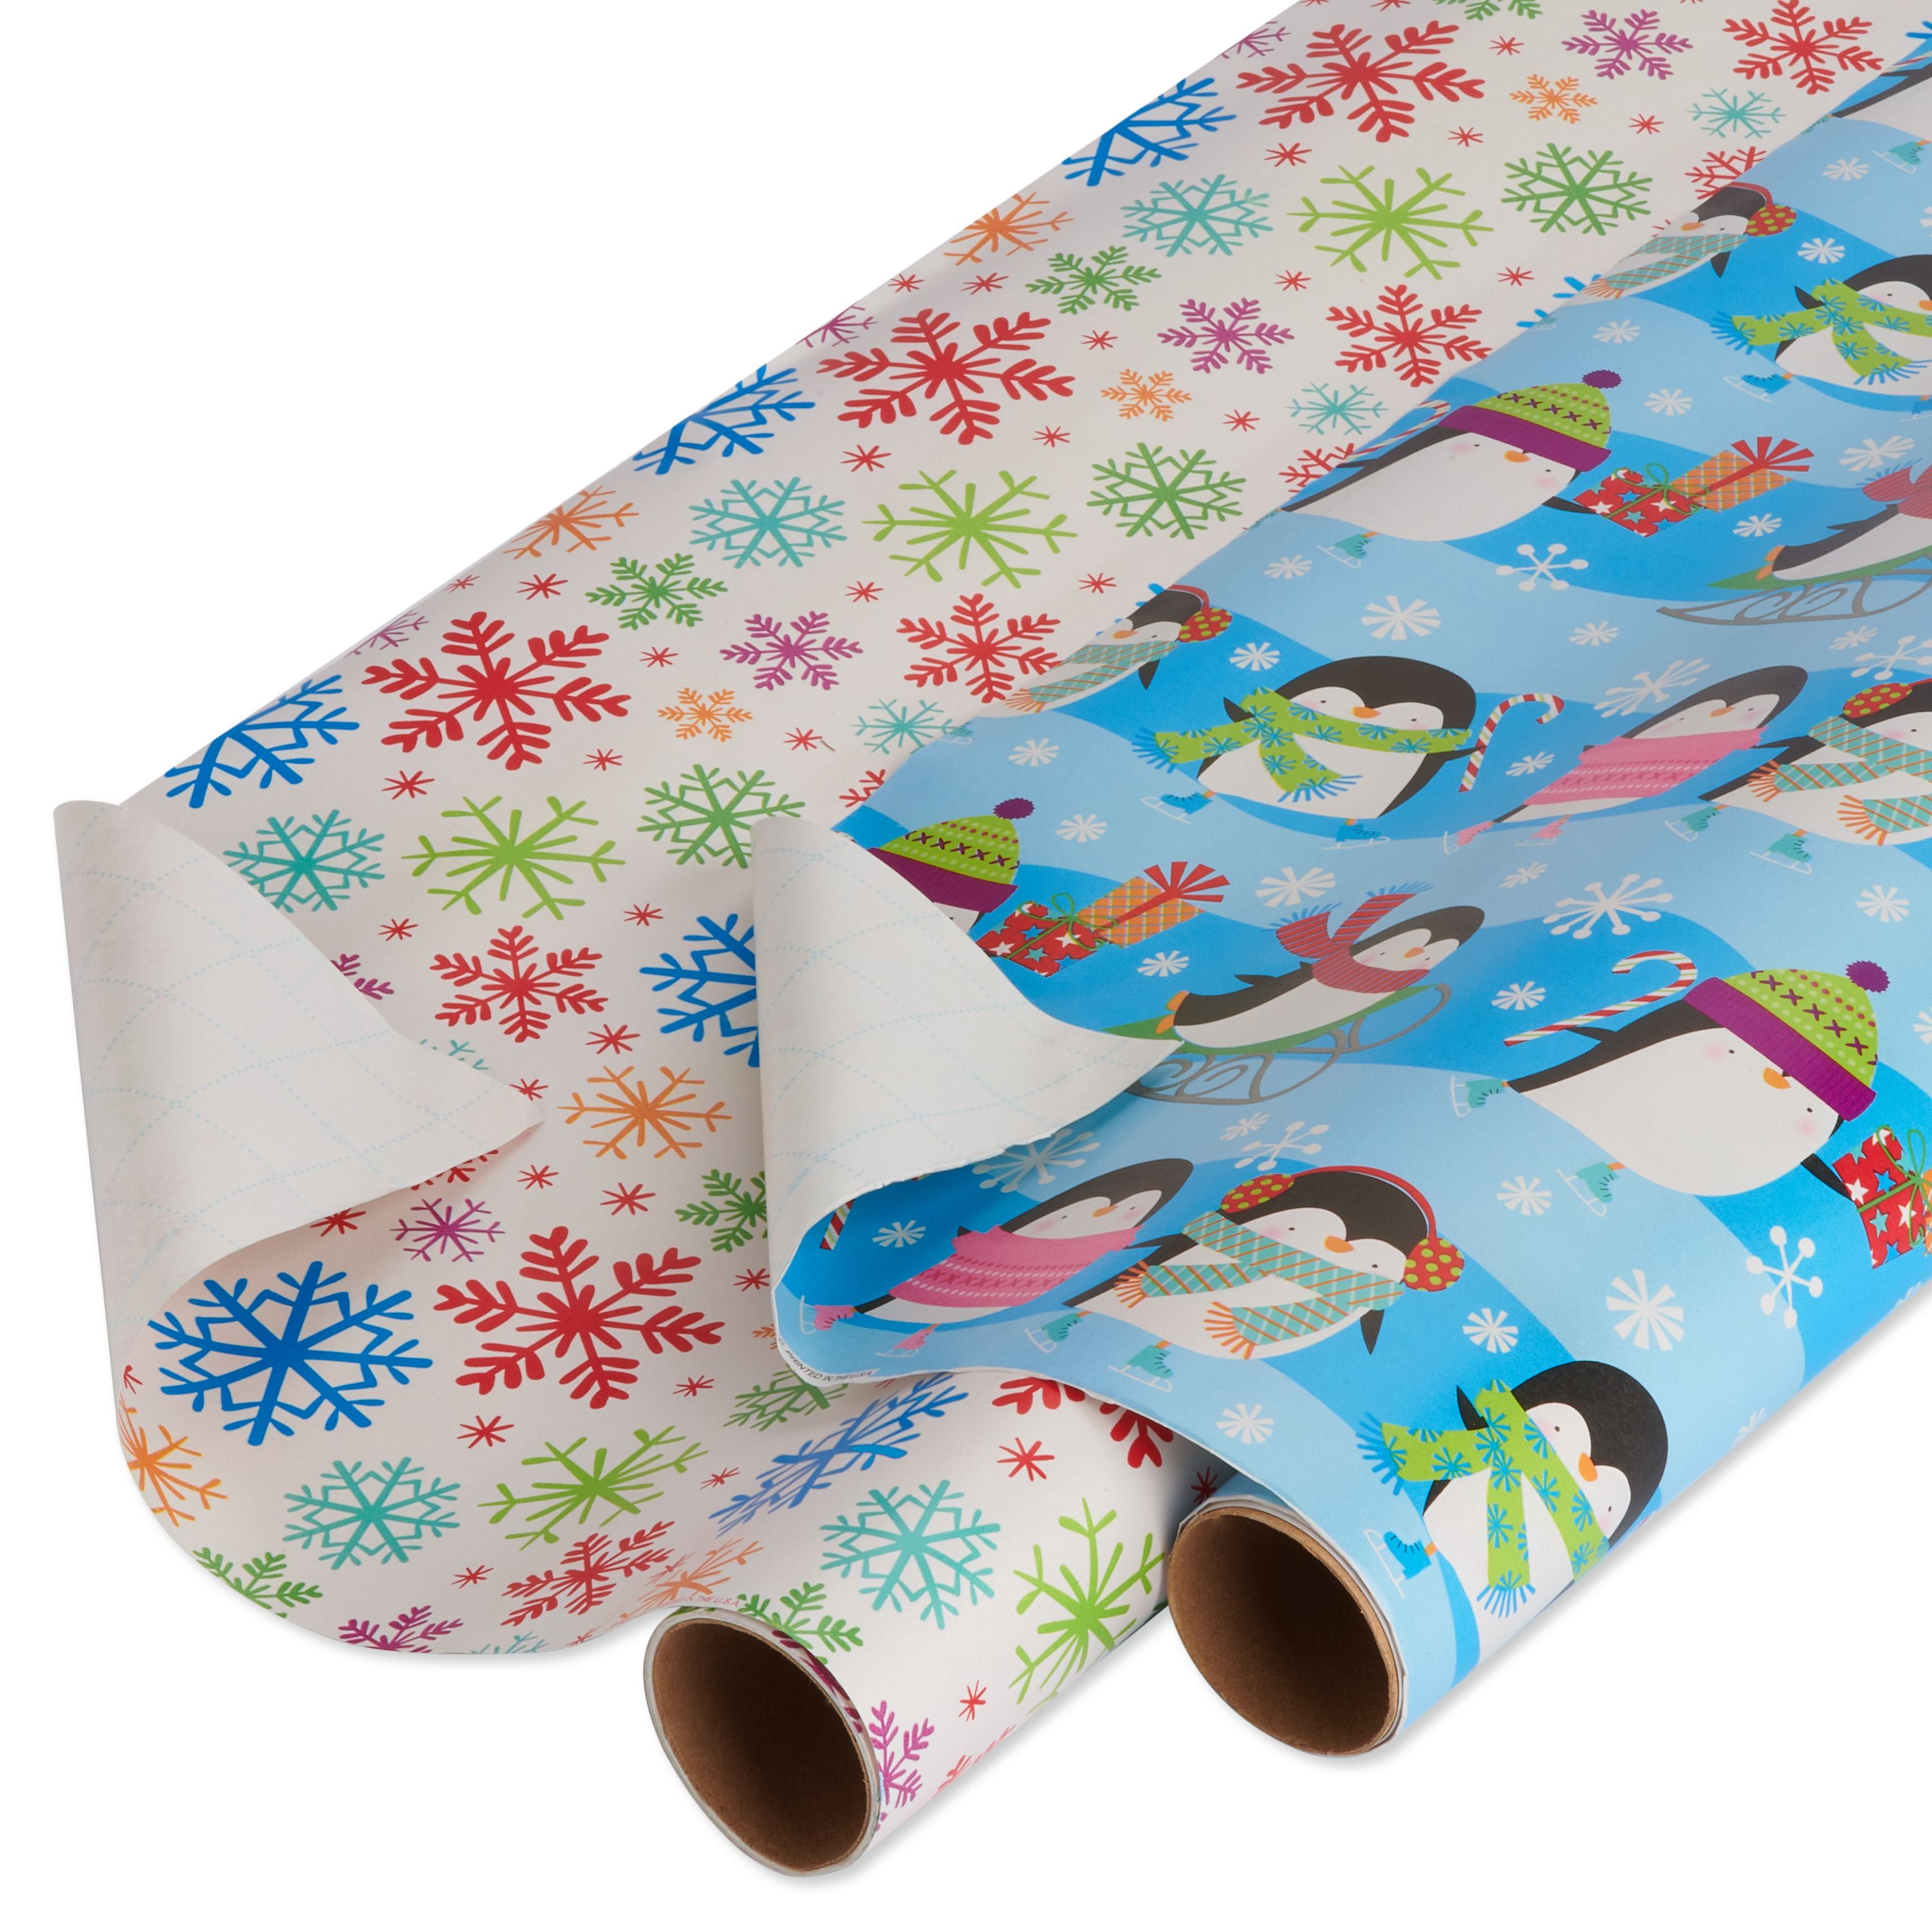 Dress up Penguin Christmas Recyclable Wrapping Paper Set 